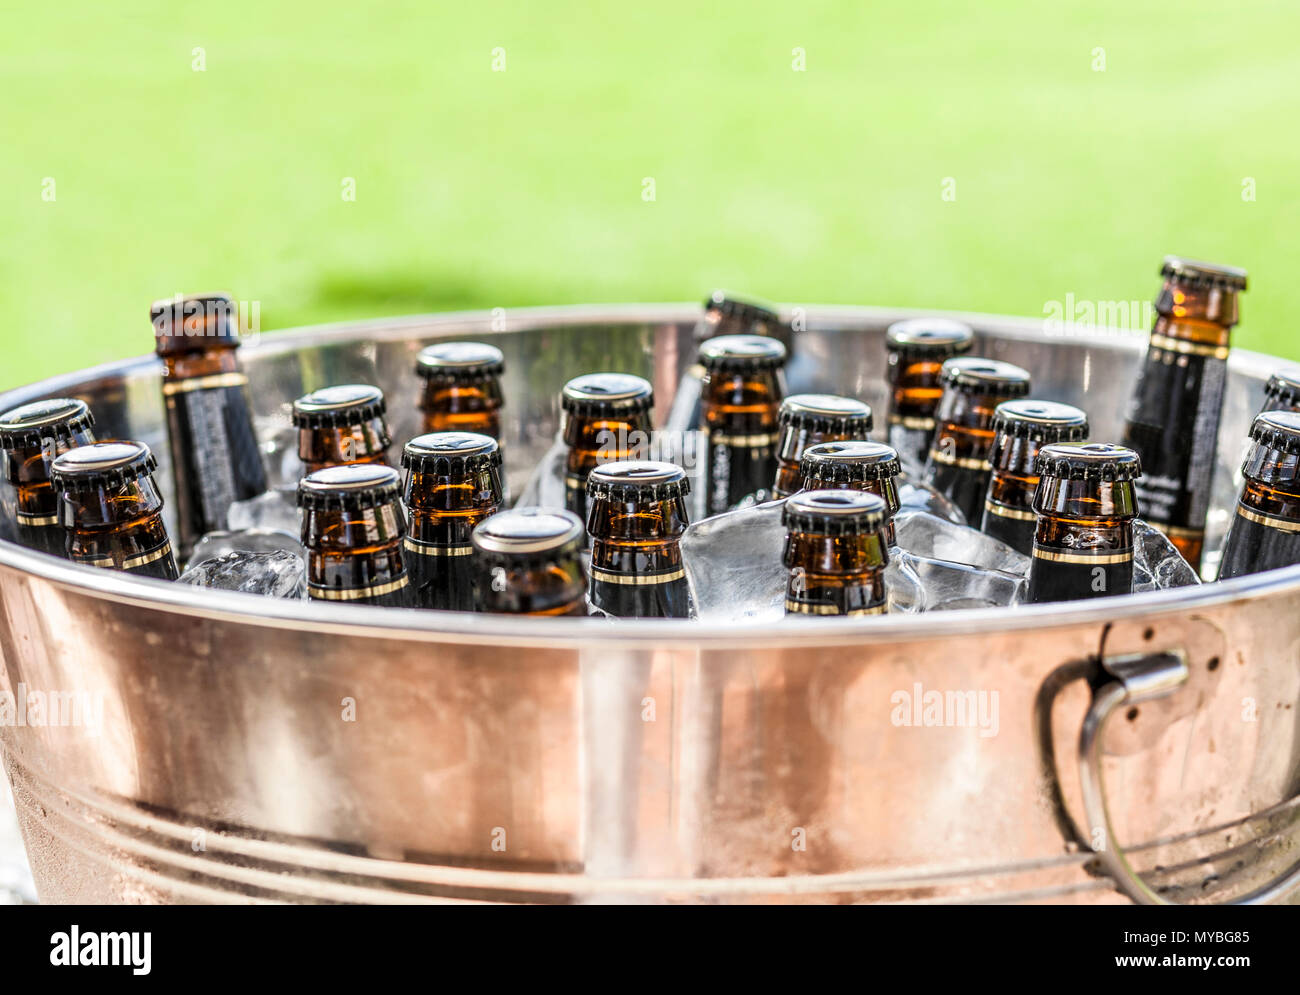 Beer bottles on ice bucket with green grass background. Closeup Stock Photo